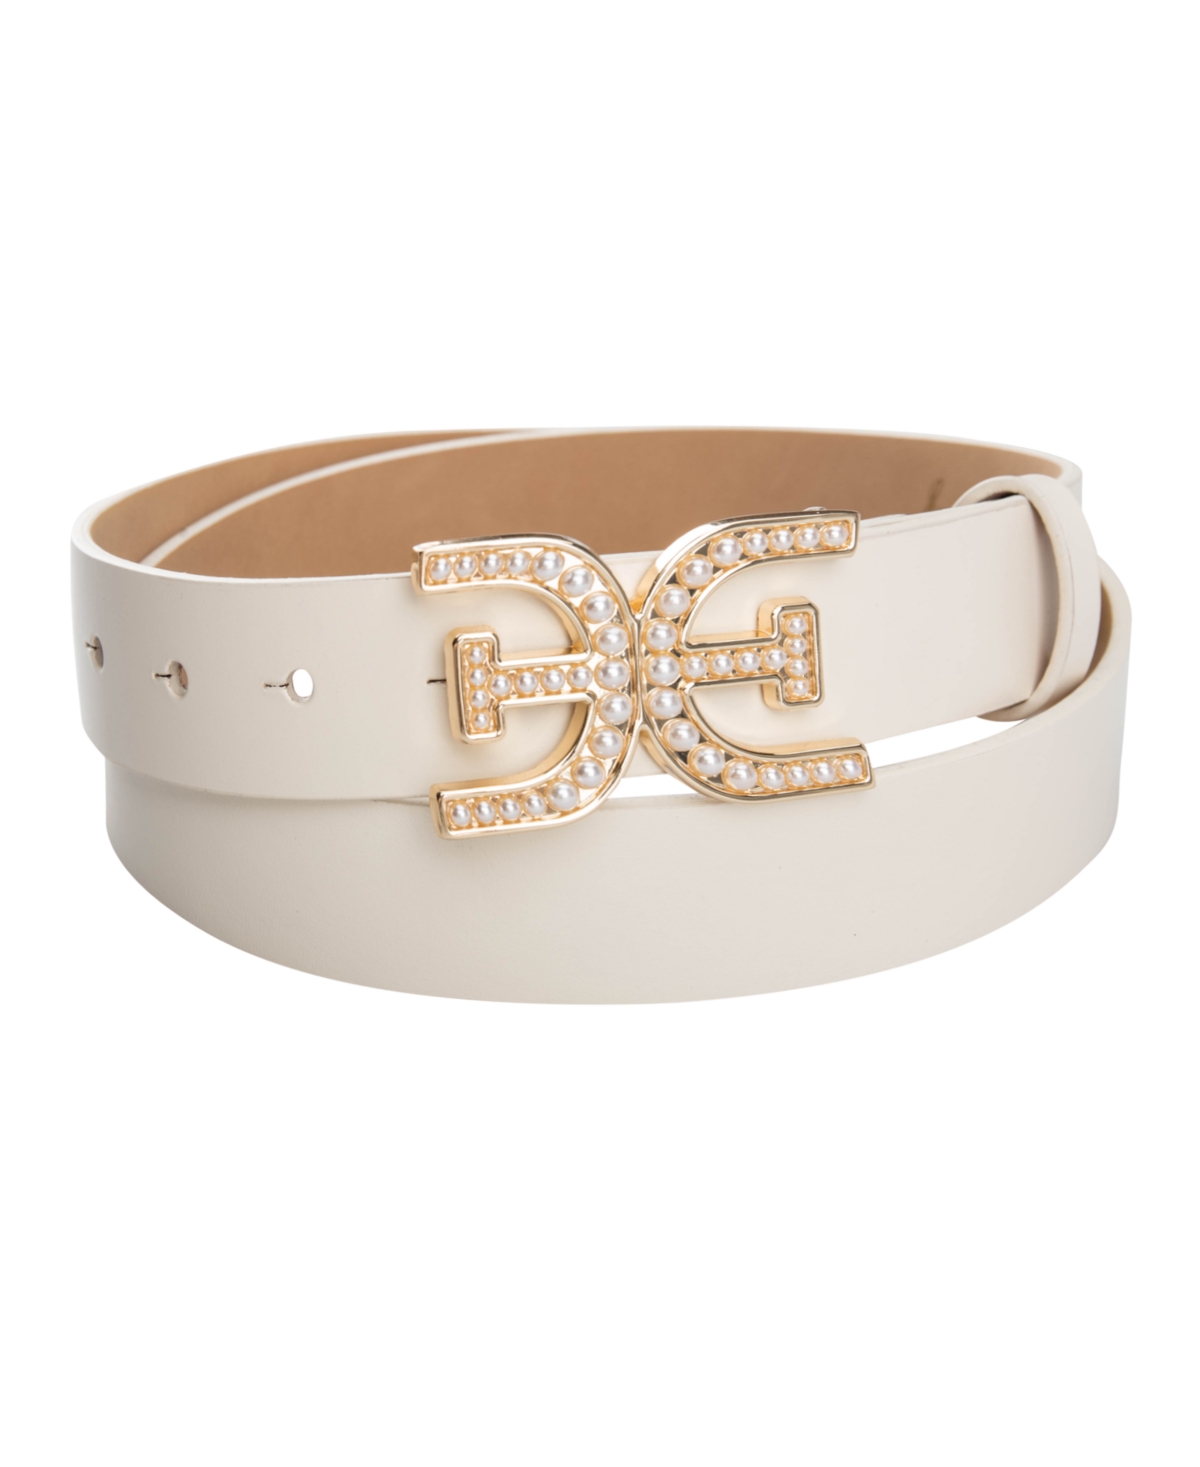 Women's Imitated Pearl Embellished Double-e Plaque Buckle Belt - Ivory